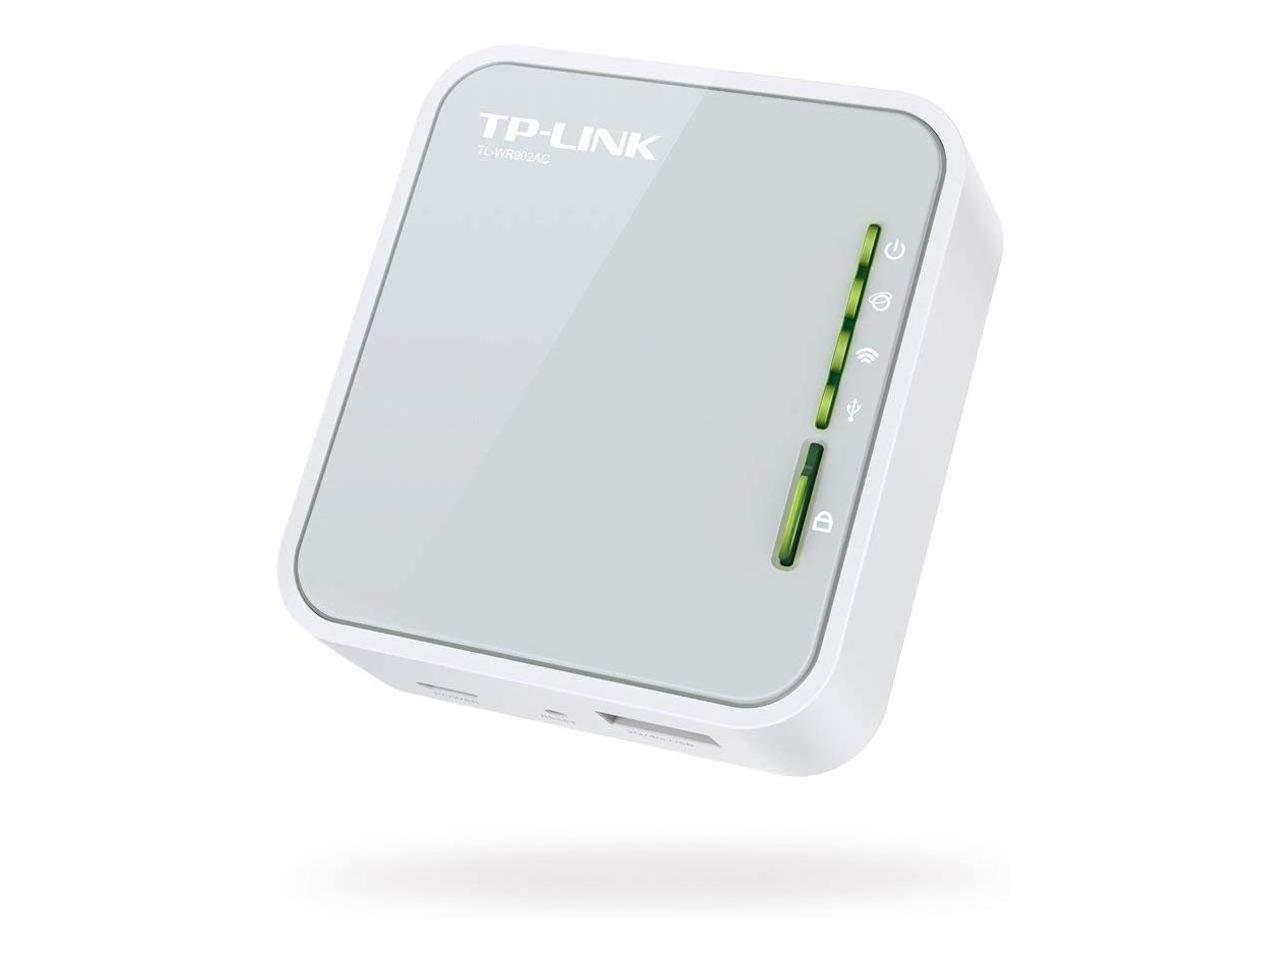 Mobile in Pocket WiFi Bridge/Range Extender/Access Point/Client Modes TL-WR902AC TP-Link AC750 Wireless Portable Nano Travel Router Renewed 